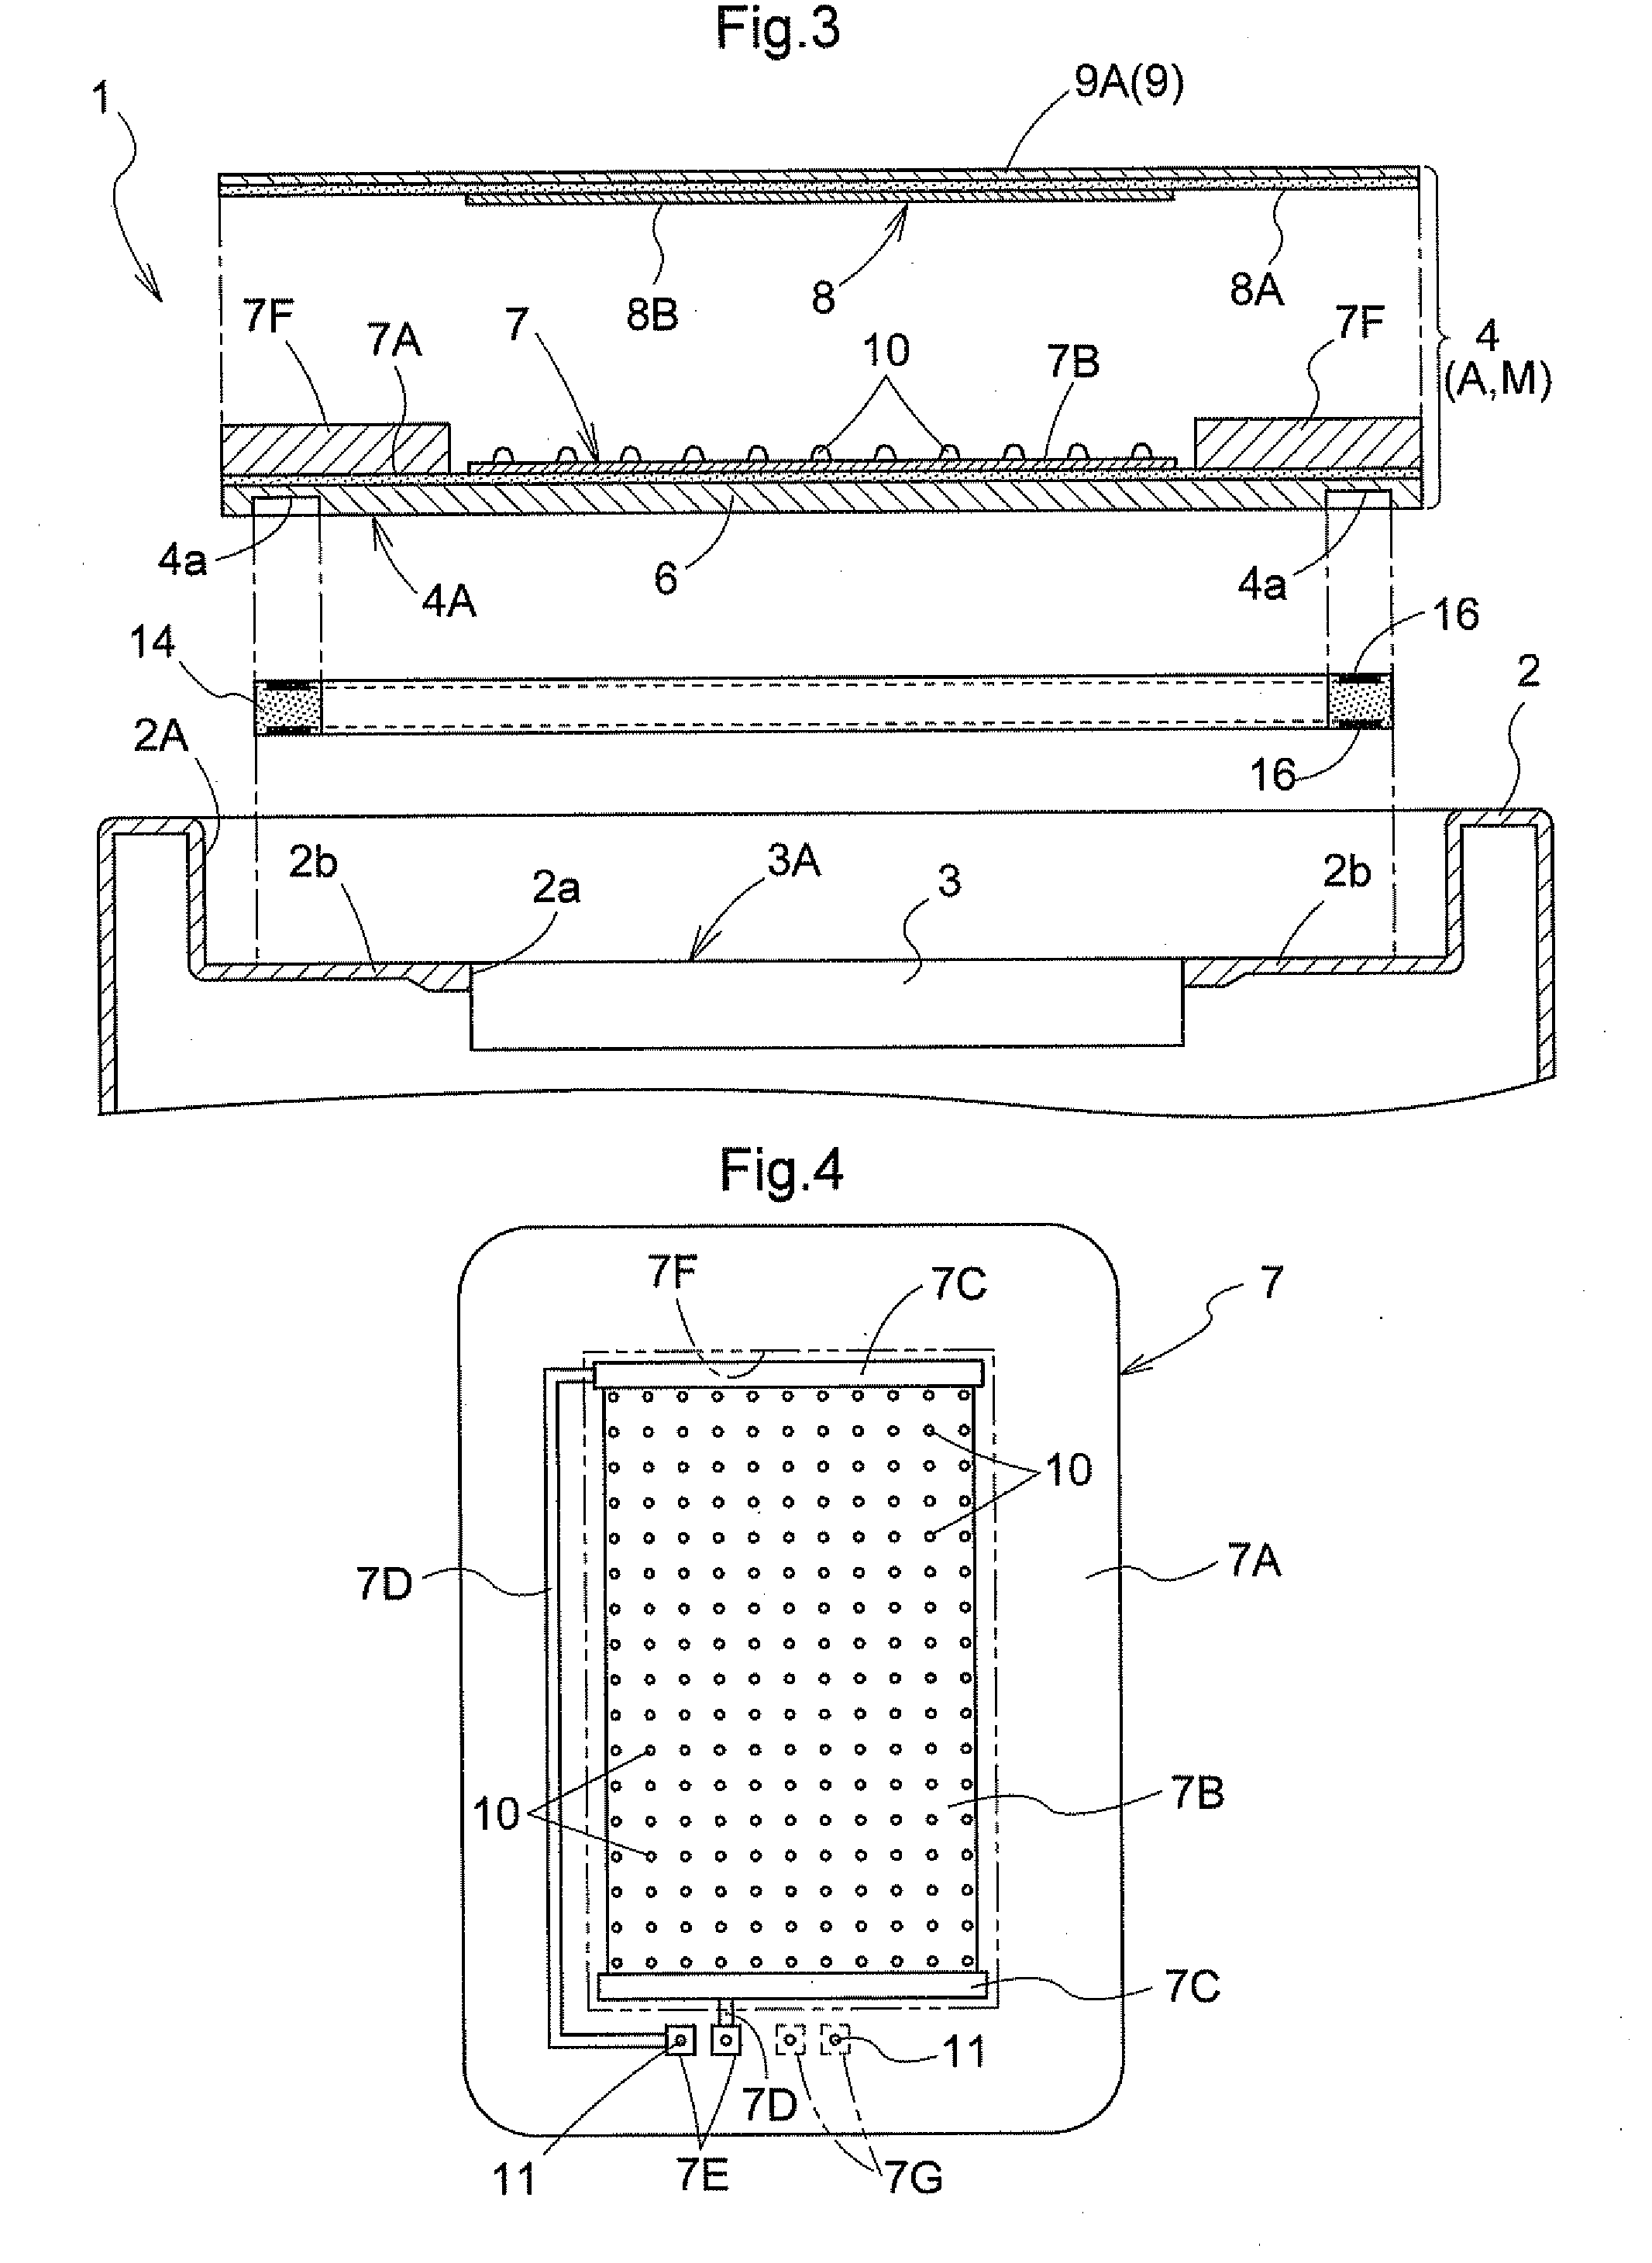 Electronic Apparatus with Protective Panel